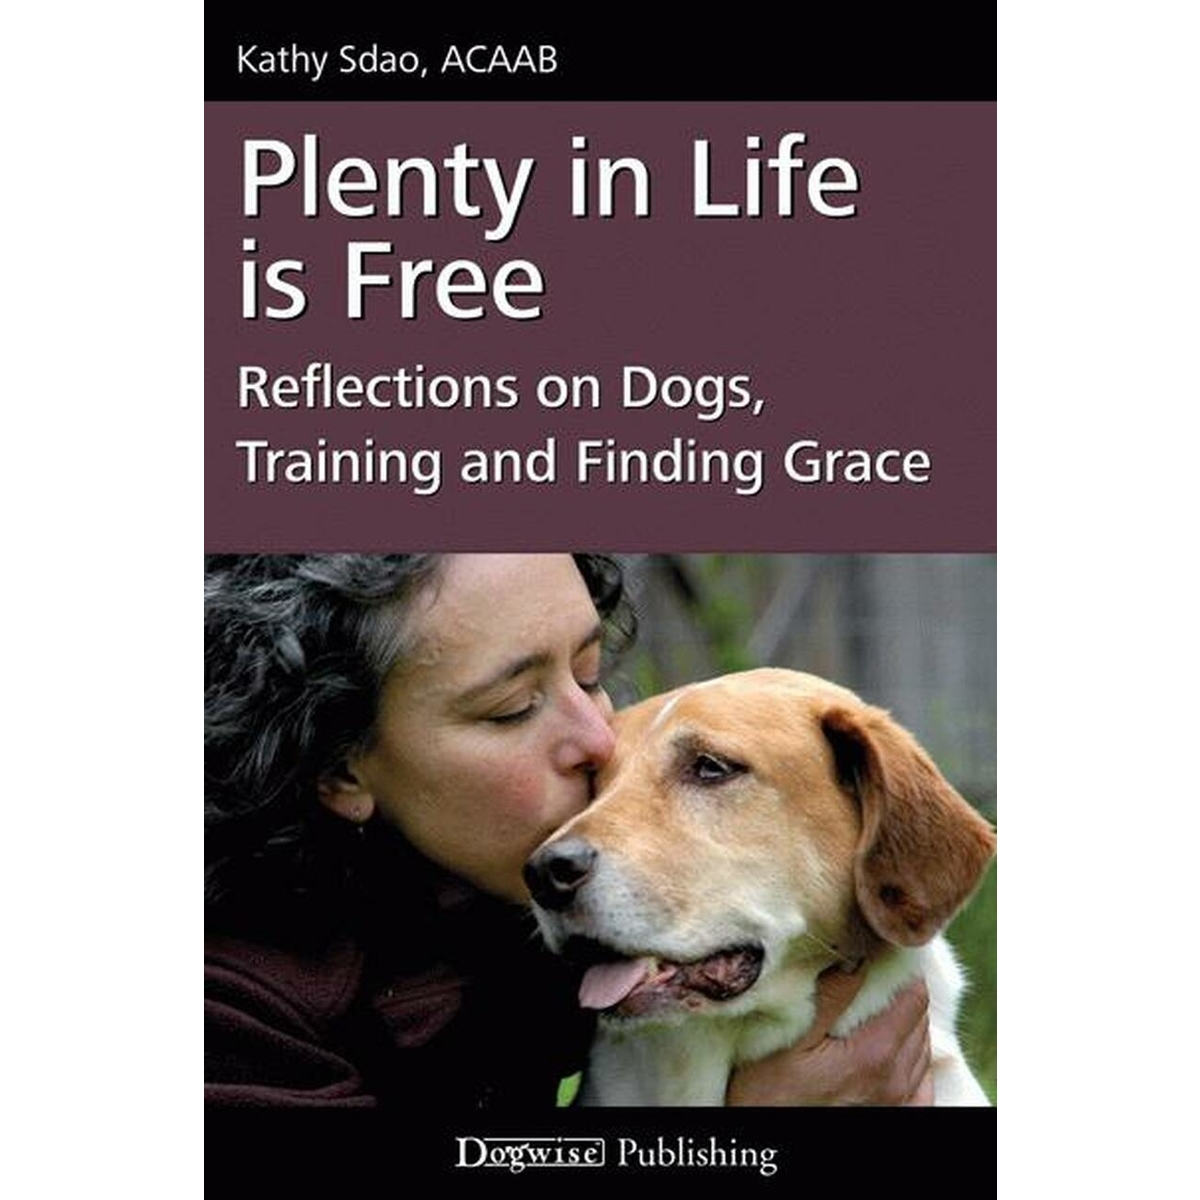 "Plenty in Life Is Free: Reflections On Dogs, Training and Finding Grace" by Kathy Sdao (Paperback Book)